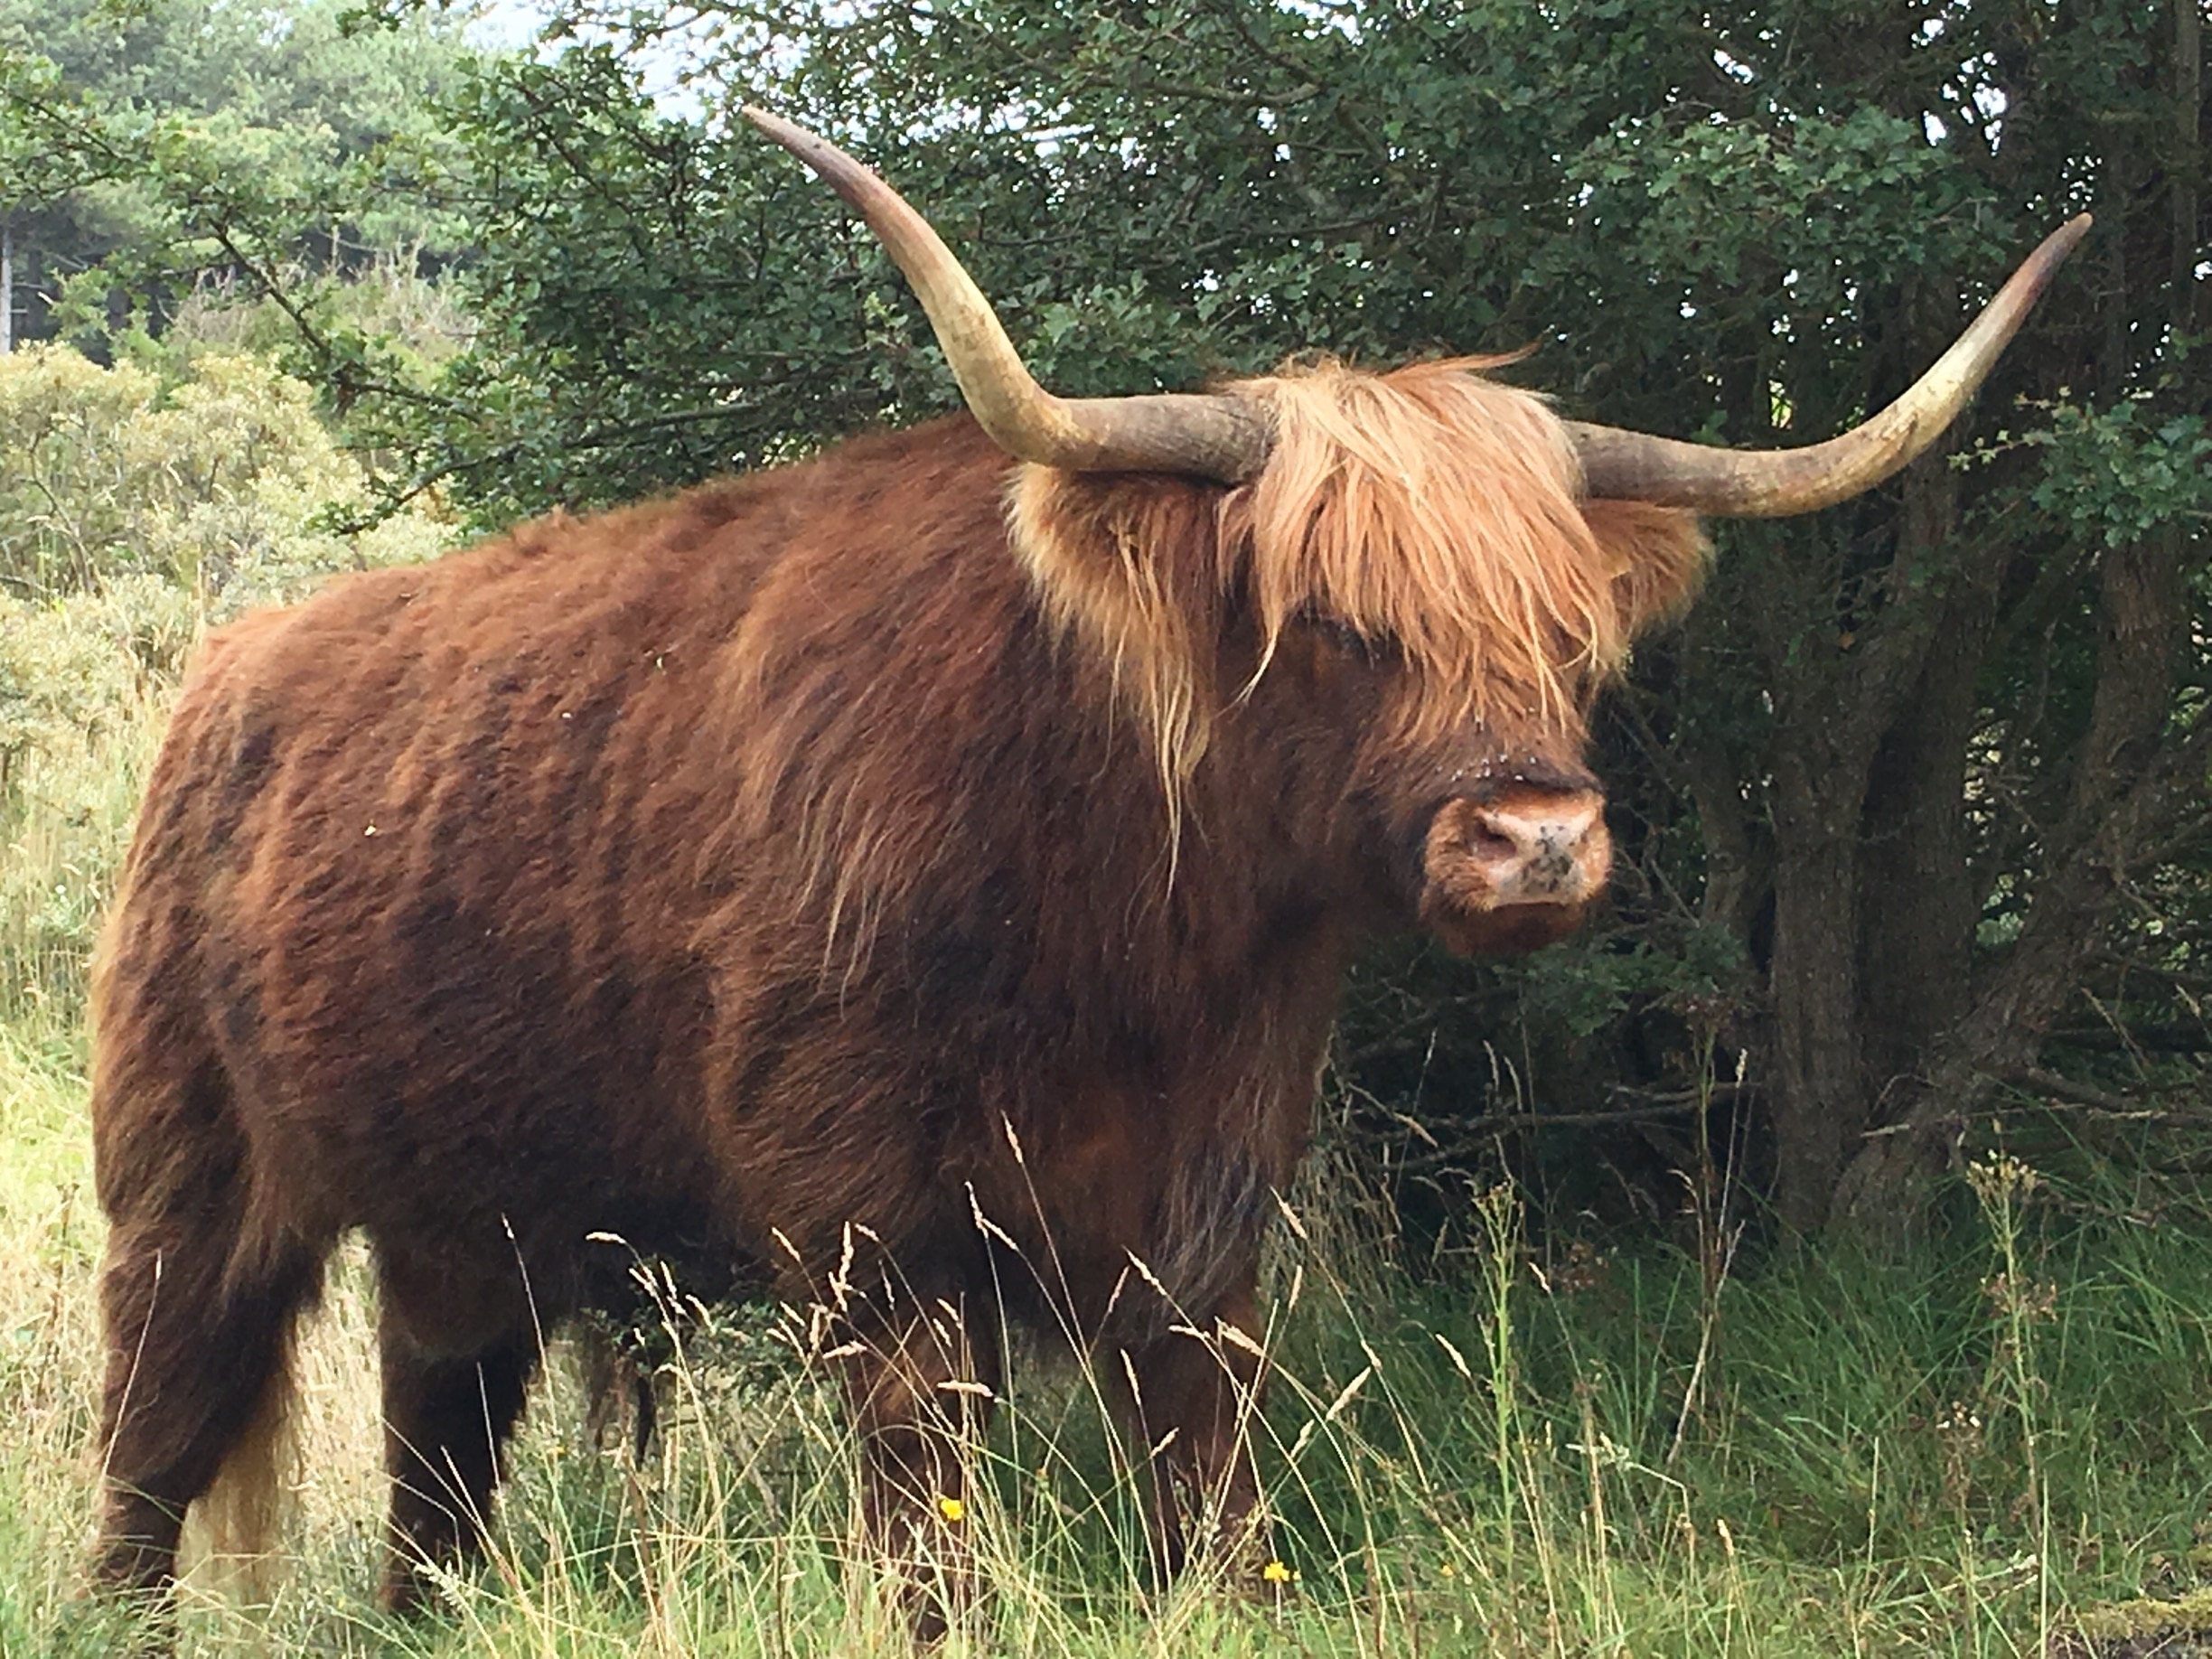 Finally got the glimpse of highland cattle (Scottish breed)